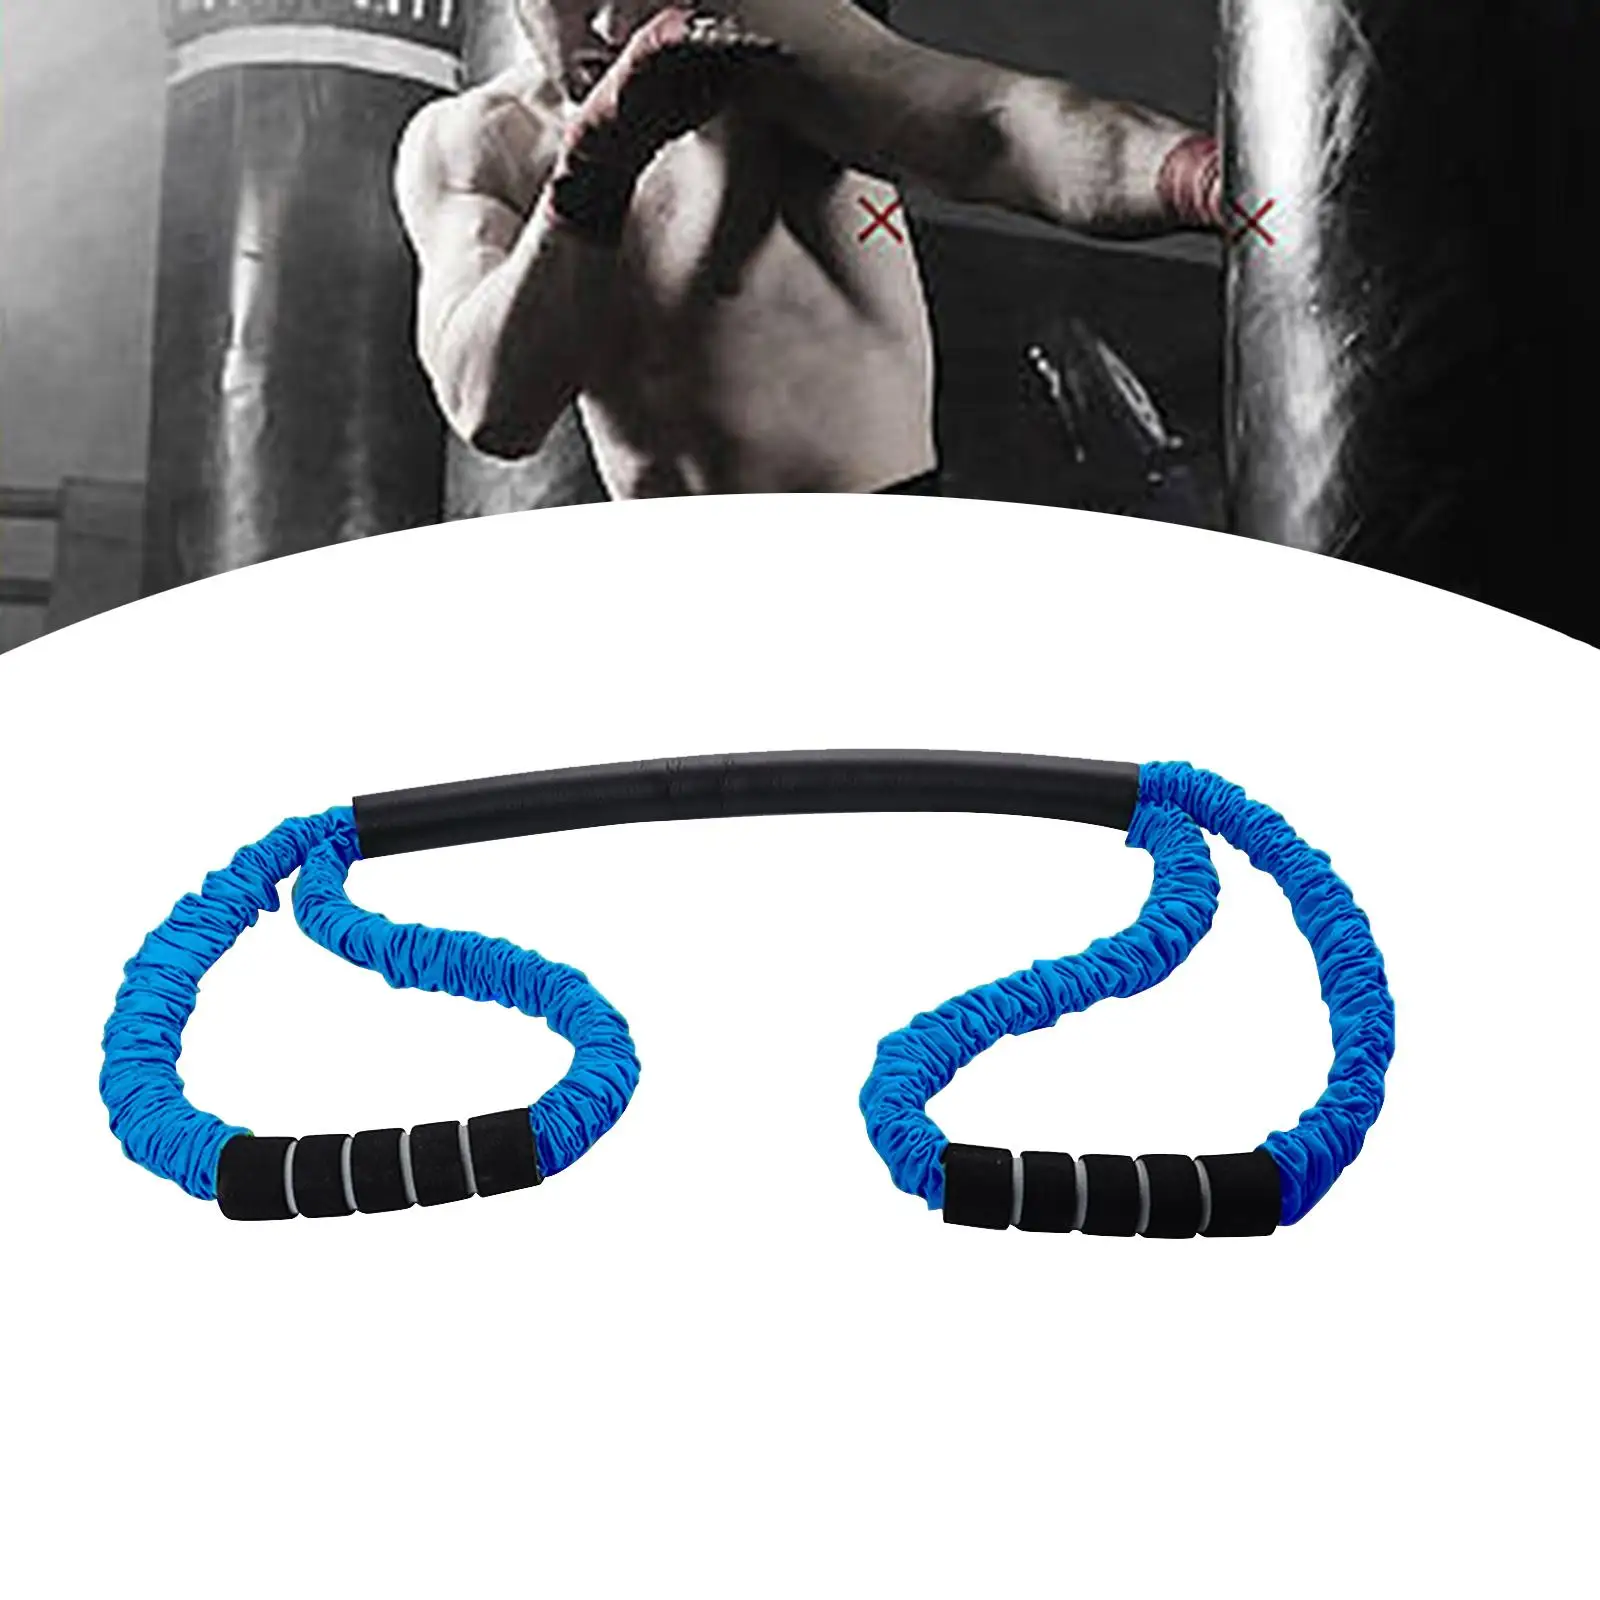 Boxing Resistance Band Pull Rope, Sports Resistance Bands with Comfort Handles,